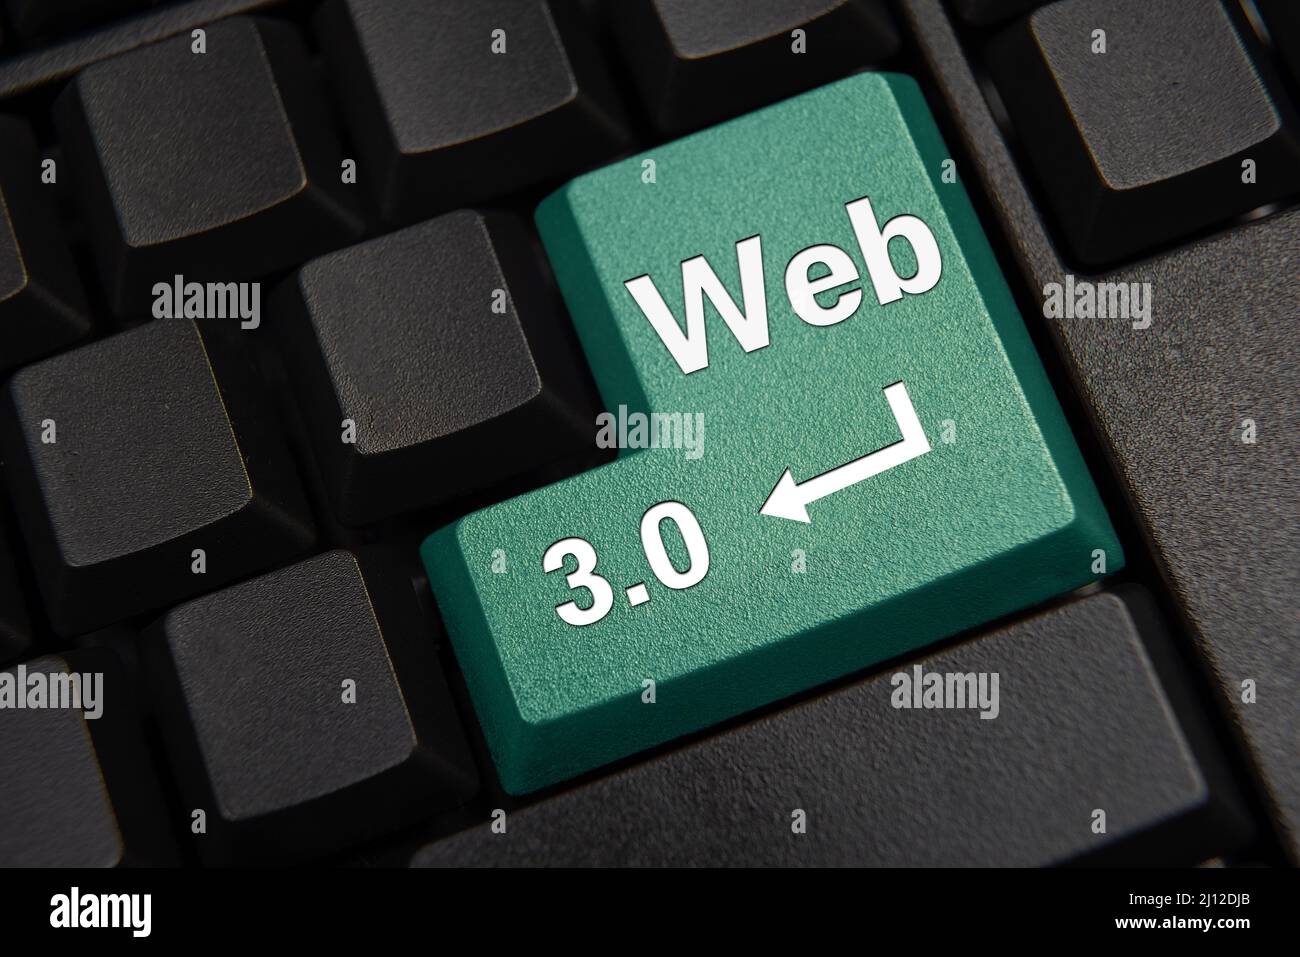 Computer keyboard with Web 3.0 buttons. Technology and WEB 3.0 concept. Stock Photo